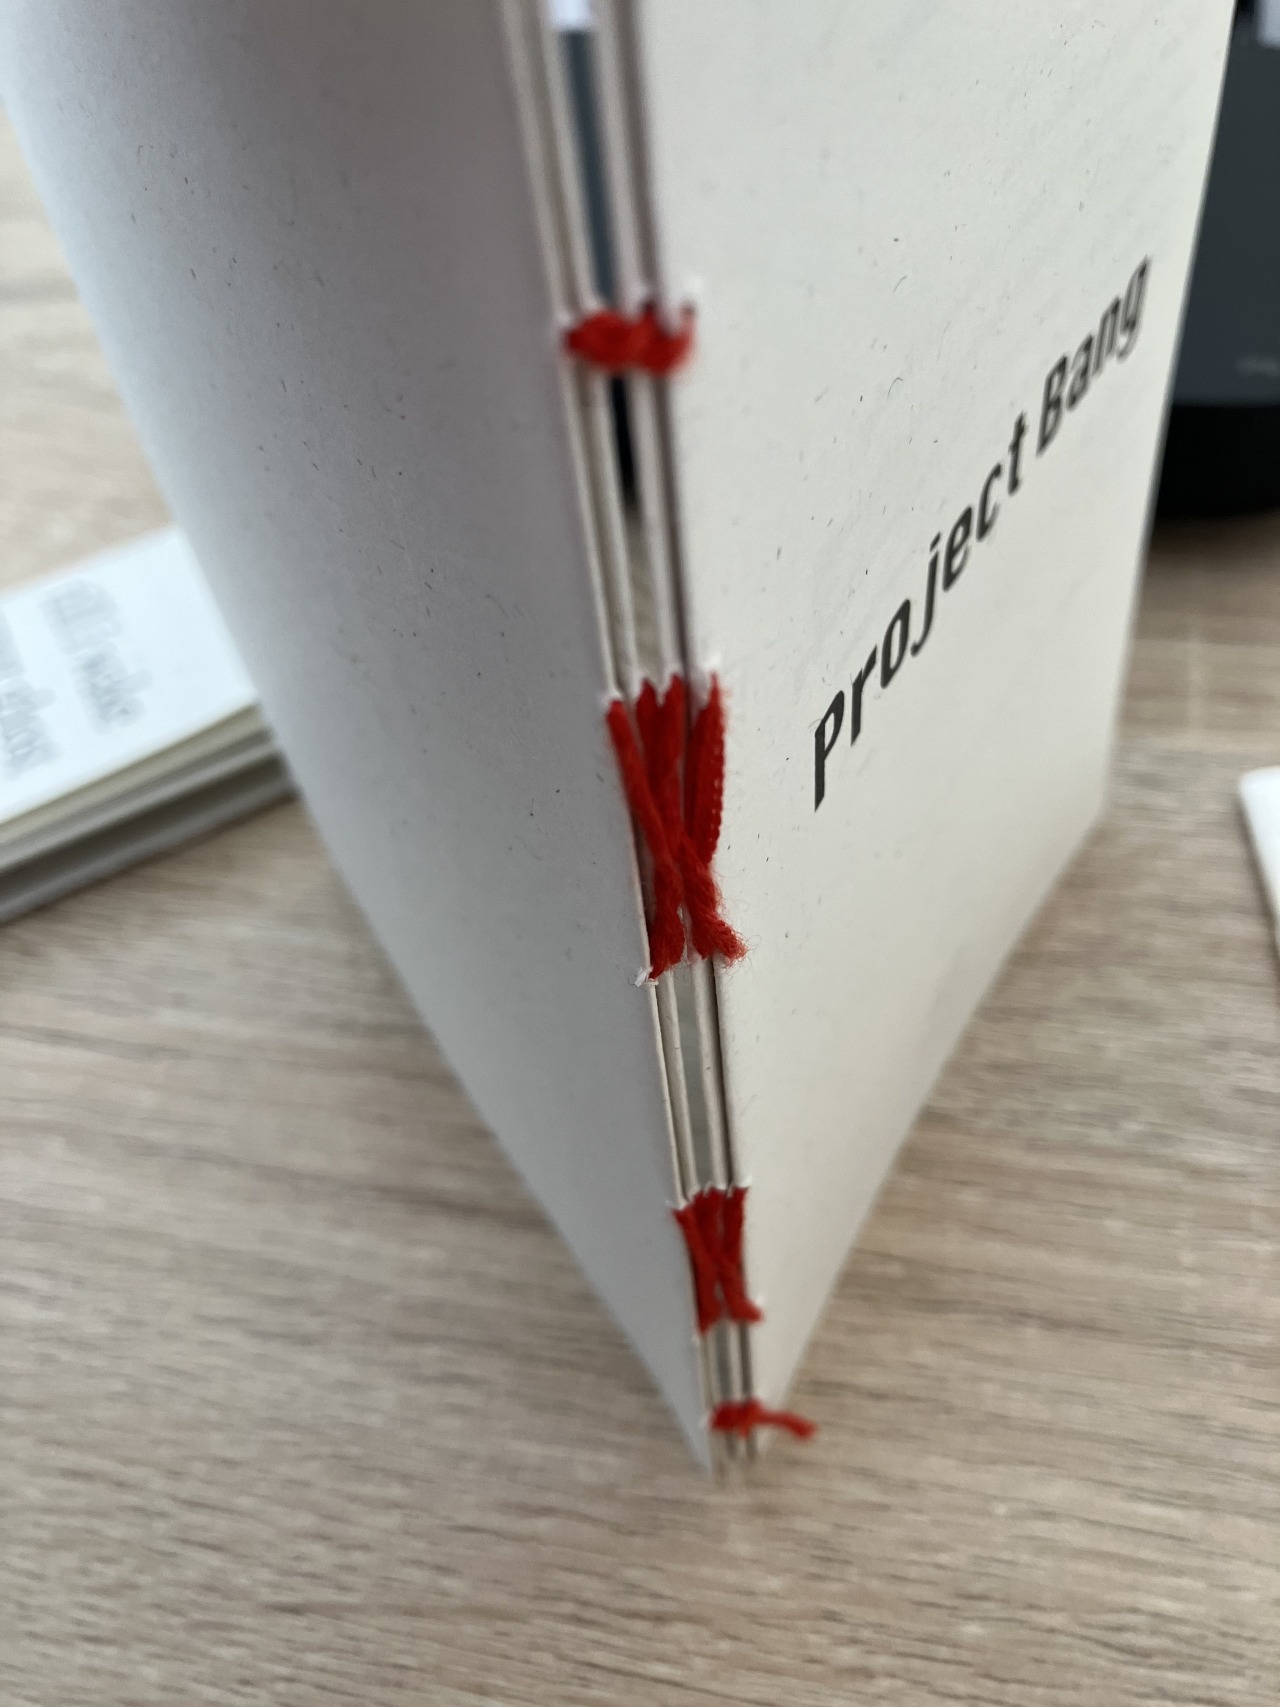 This is the most challenging book I've made so far. I used fabric made from  my own art and bound it with a French Link Stitch. : r/bookbinding